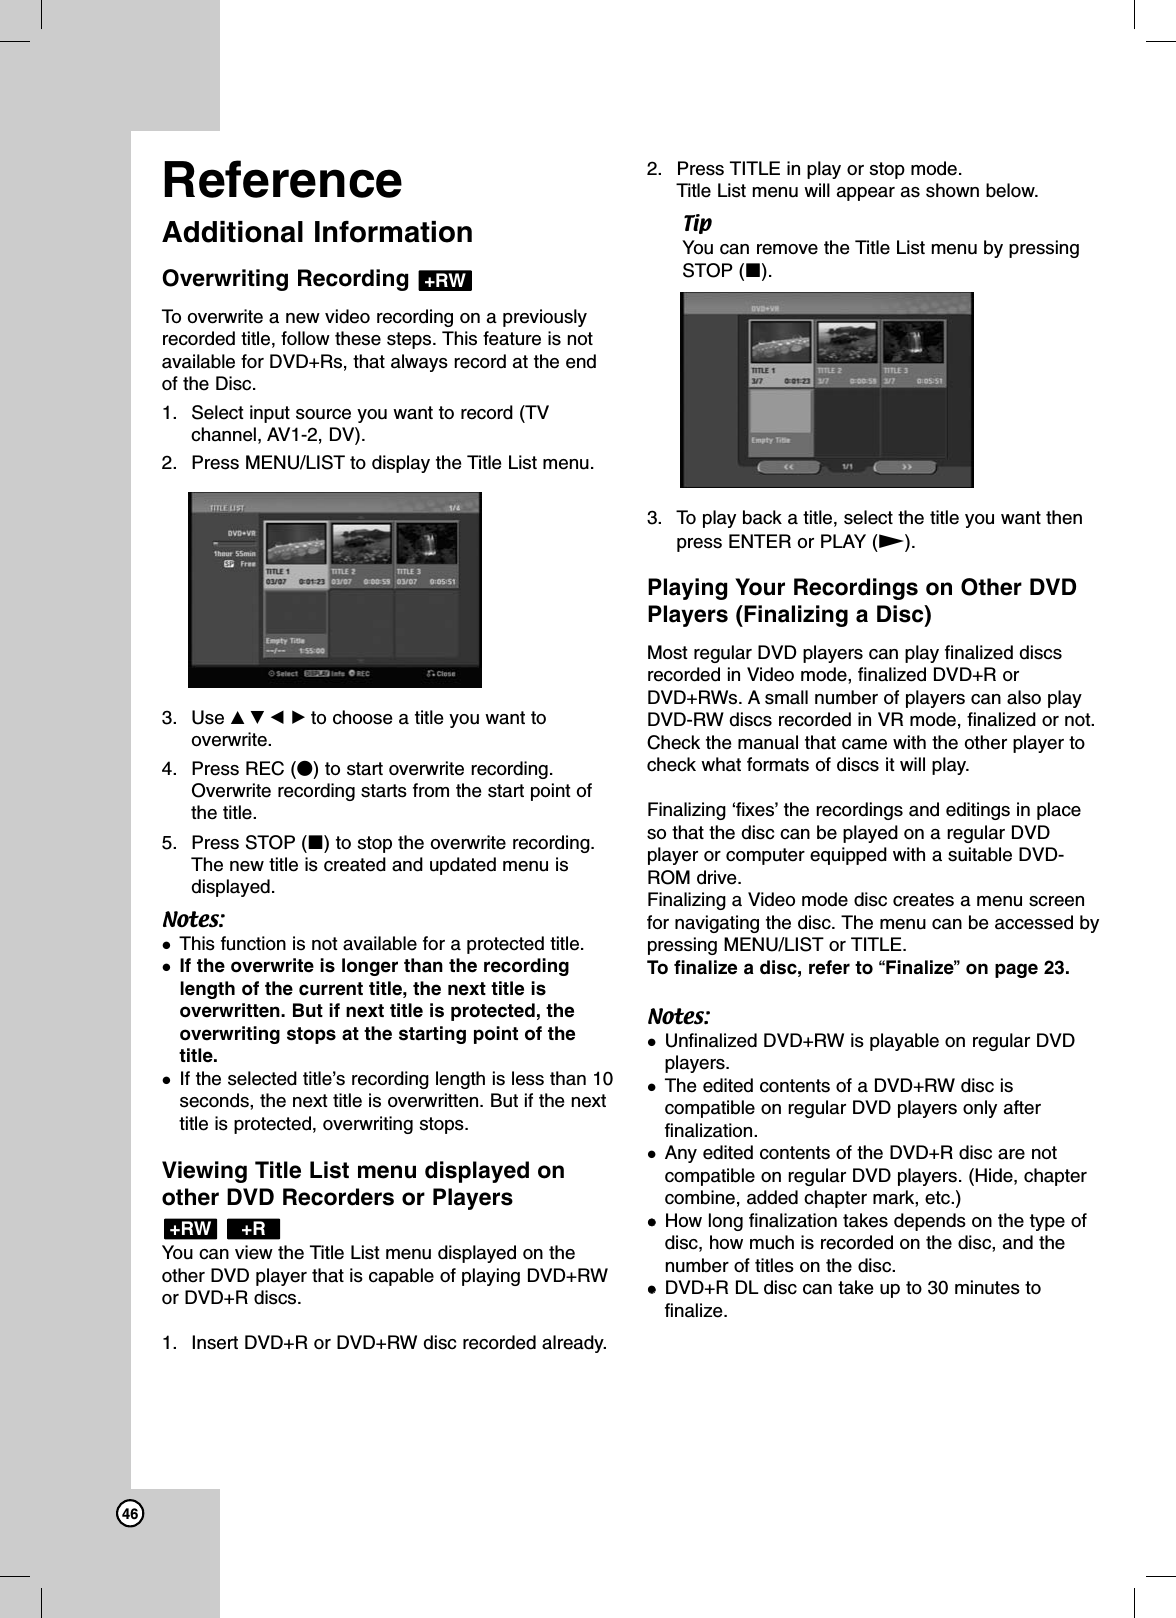 46ReferenceAdditional InformationOverwriting Recording To overwrite a new video recording on a previouslyrecorded title, follow these steps. This feature is notavailable for DVD+Rs, that always record at the endof the Disc.1. Select input source you want to record (TVchannel, AV1-2, DV). 2. Press MENU/LIST to display the Title List menu.3. Use vVbBto choose a title you want tooverwrite.4. Press REC (z) to start overwrite recording.Overwrite recording starts from the start point ofthe title.5. Press STOP (x) to stop the overwrite recording.The new title is created and updated menu isdisplayed.Notes:This function is not available for a protected title. If the overwrite is longer than the recordinglength of the current title, the next title isoverwritten. But if next title is protected, theoverwriting stops at the starting point of thetitle.If the selected title’s recording length is less than 10seconds, the next title is overwritten. But if the nexttitle is protected, overwriting stops.Viewing Title List menu displayed onother DVD Recorders or Players You can view the Title List menu displayed on theother DVD player that is capable of playing DVD+RWor DVD+R discs. 1. Insert DVD+R or DVD+RW disc recorded already.2. Press TITLE in play or stop mode.Title List menu will appear as shown below.TipYou can remove the Title List menu by pressingSTOP (x).3. To play back a title, select the title you want thenpress ENTER or PLAY (N).Playing Your Recordings on Other DVDPlayers (Finalizing a Disc)Most regular DVD players can play finalized discsrecorded in Video mode, finalized DVD+R orDVD+RWs. A small number of players can also playDVD-RW discs recorded in VR mode, finalized or not.Check the manual that came with the other player tocheck what formats of discs it will play.Finalizing ‘fixes’the recordings and editings in placeso that the disc can be played on a regular DVDplayer or computer equipped with a suitable DVD-ROM drive.Finalizing a Video mode disc creates a menu screenfor navigating the disc. The menu can be accessed bypressing MENU/LIST or TITLE. To finalize a disc, refer to “Finalize”on page 23.Notes:Unfinalized DVD+RW is playable on regular DVDplayers.The edited contents of a DVD+RW disc iscompatible on regular DVD players only afterfinalization.Any edited contents of the DVD+R disc are not compatible on regular DVD players. (Hide, chaptercombine, added chapter mark, etc.)How long finalization takes depends on the type ofdisc, how much is recorded on the disc, and thenumber of titles on the disc. DVD+R DL disc can take up to 30 minutes tofinalize.+R+RW+RW